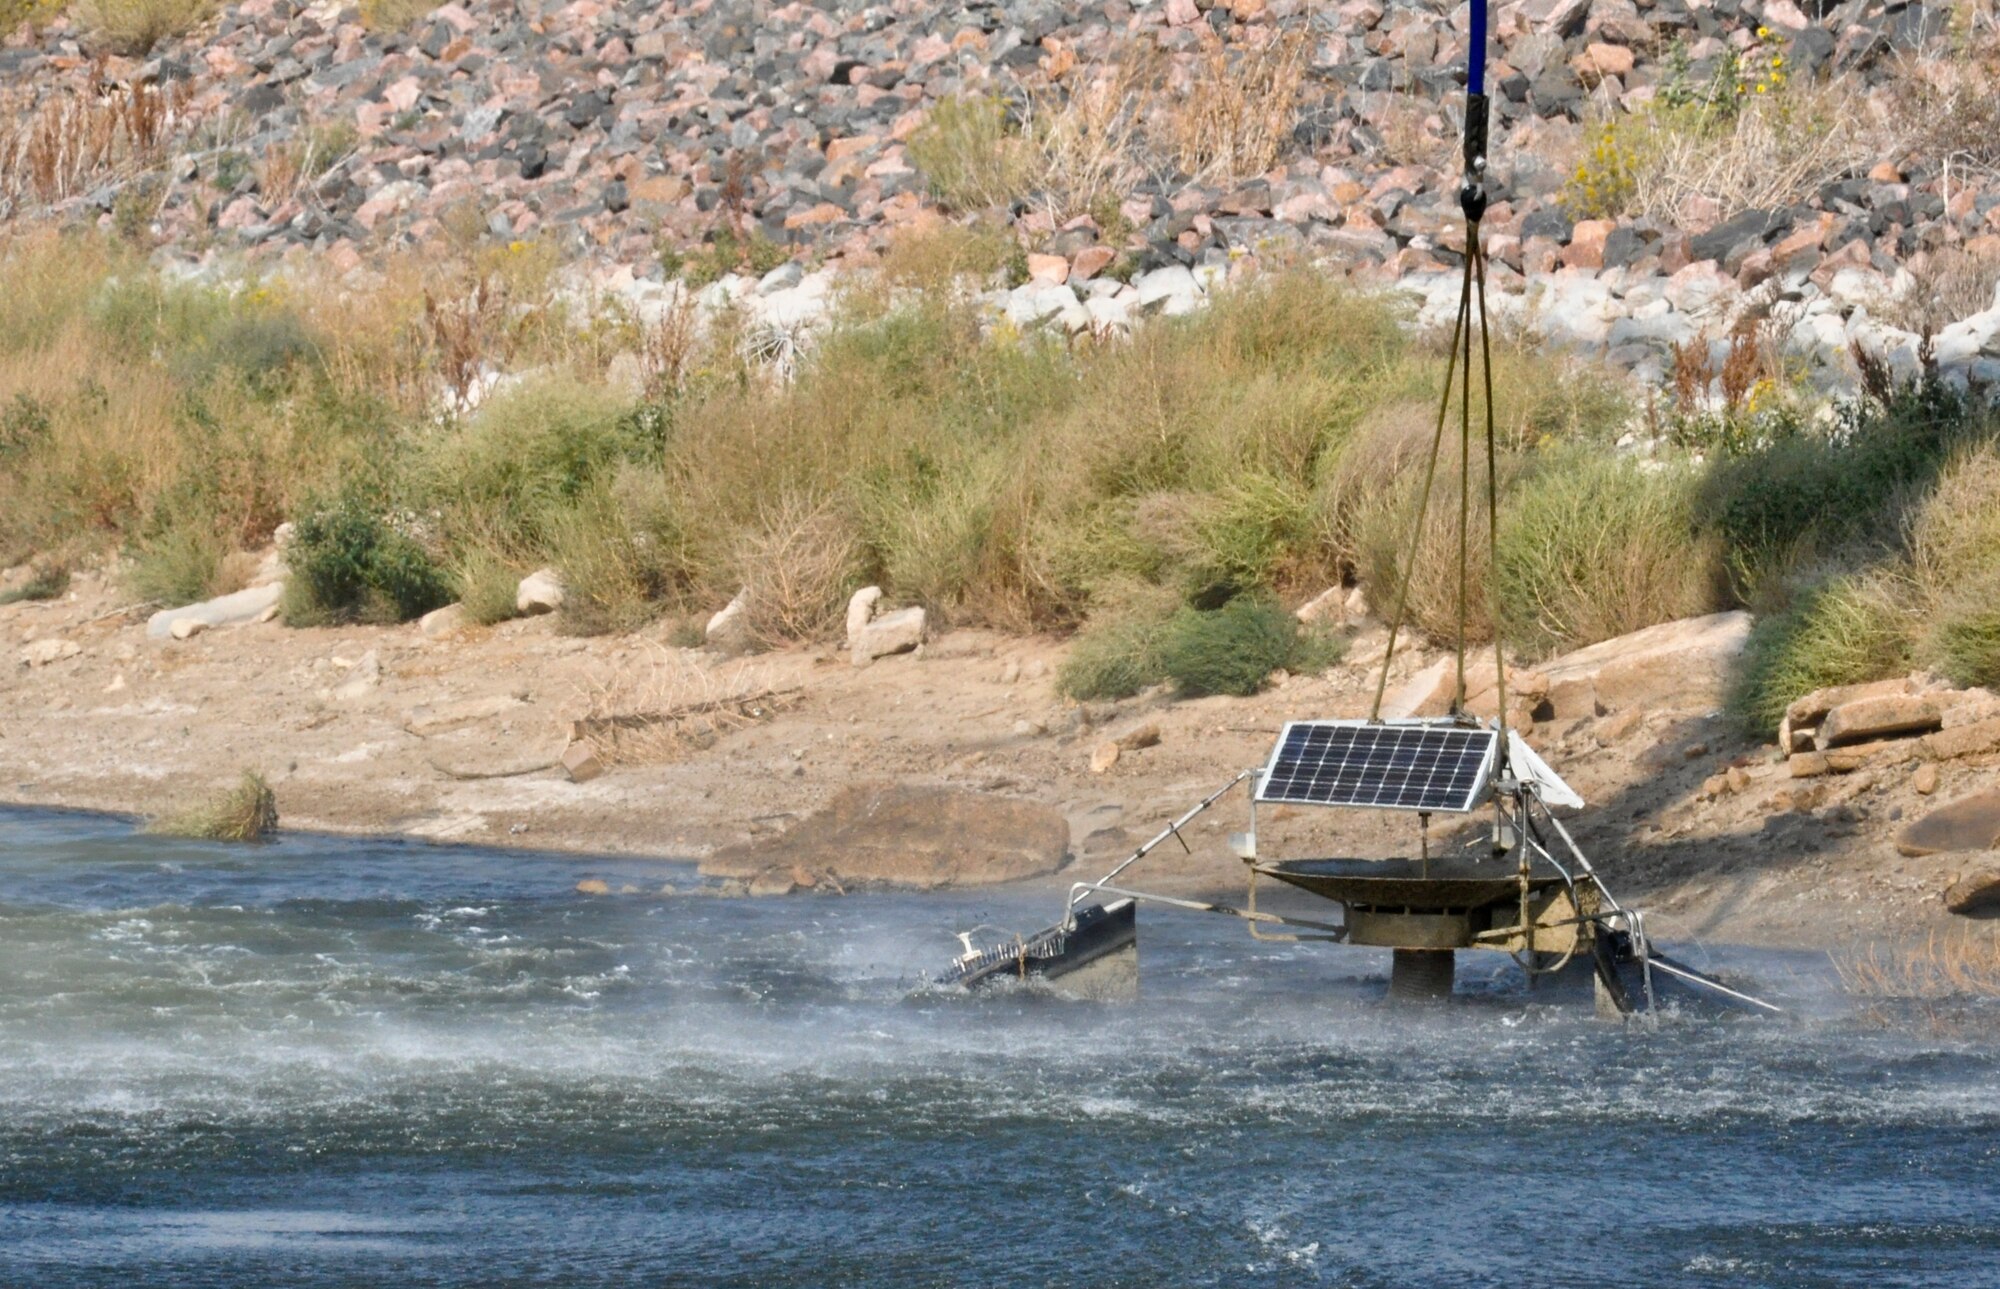 BUCKLEY AIR FORCE BASE, Colo. – A non-functioning aerator was lifted from the shallow waters of Lake Williams Sept. 20, 2012.  The Colorado Army National Guard teamed up with the 460th Civil Engineer Squadron to remove the device from the lake. (U.S. Air Force photo by Staff Sgt. Nicholas Rau)